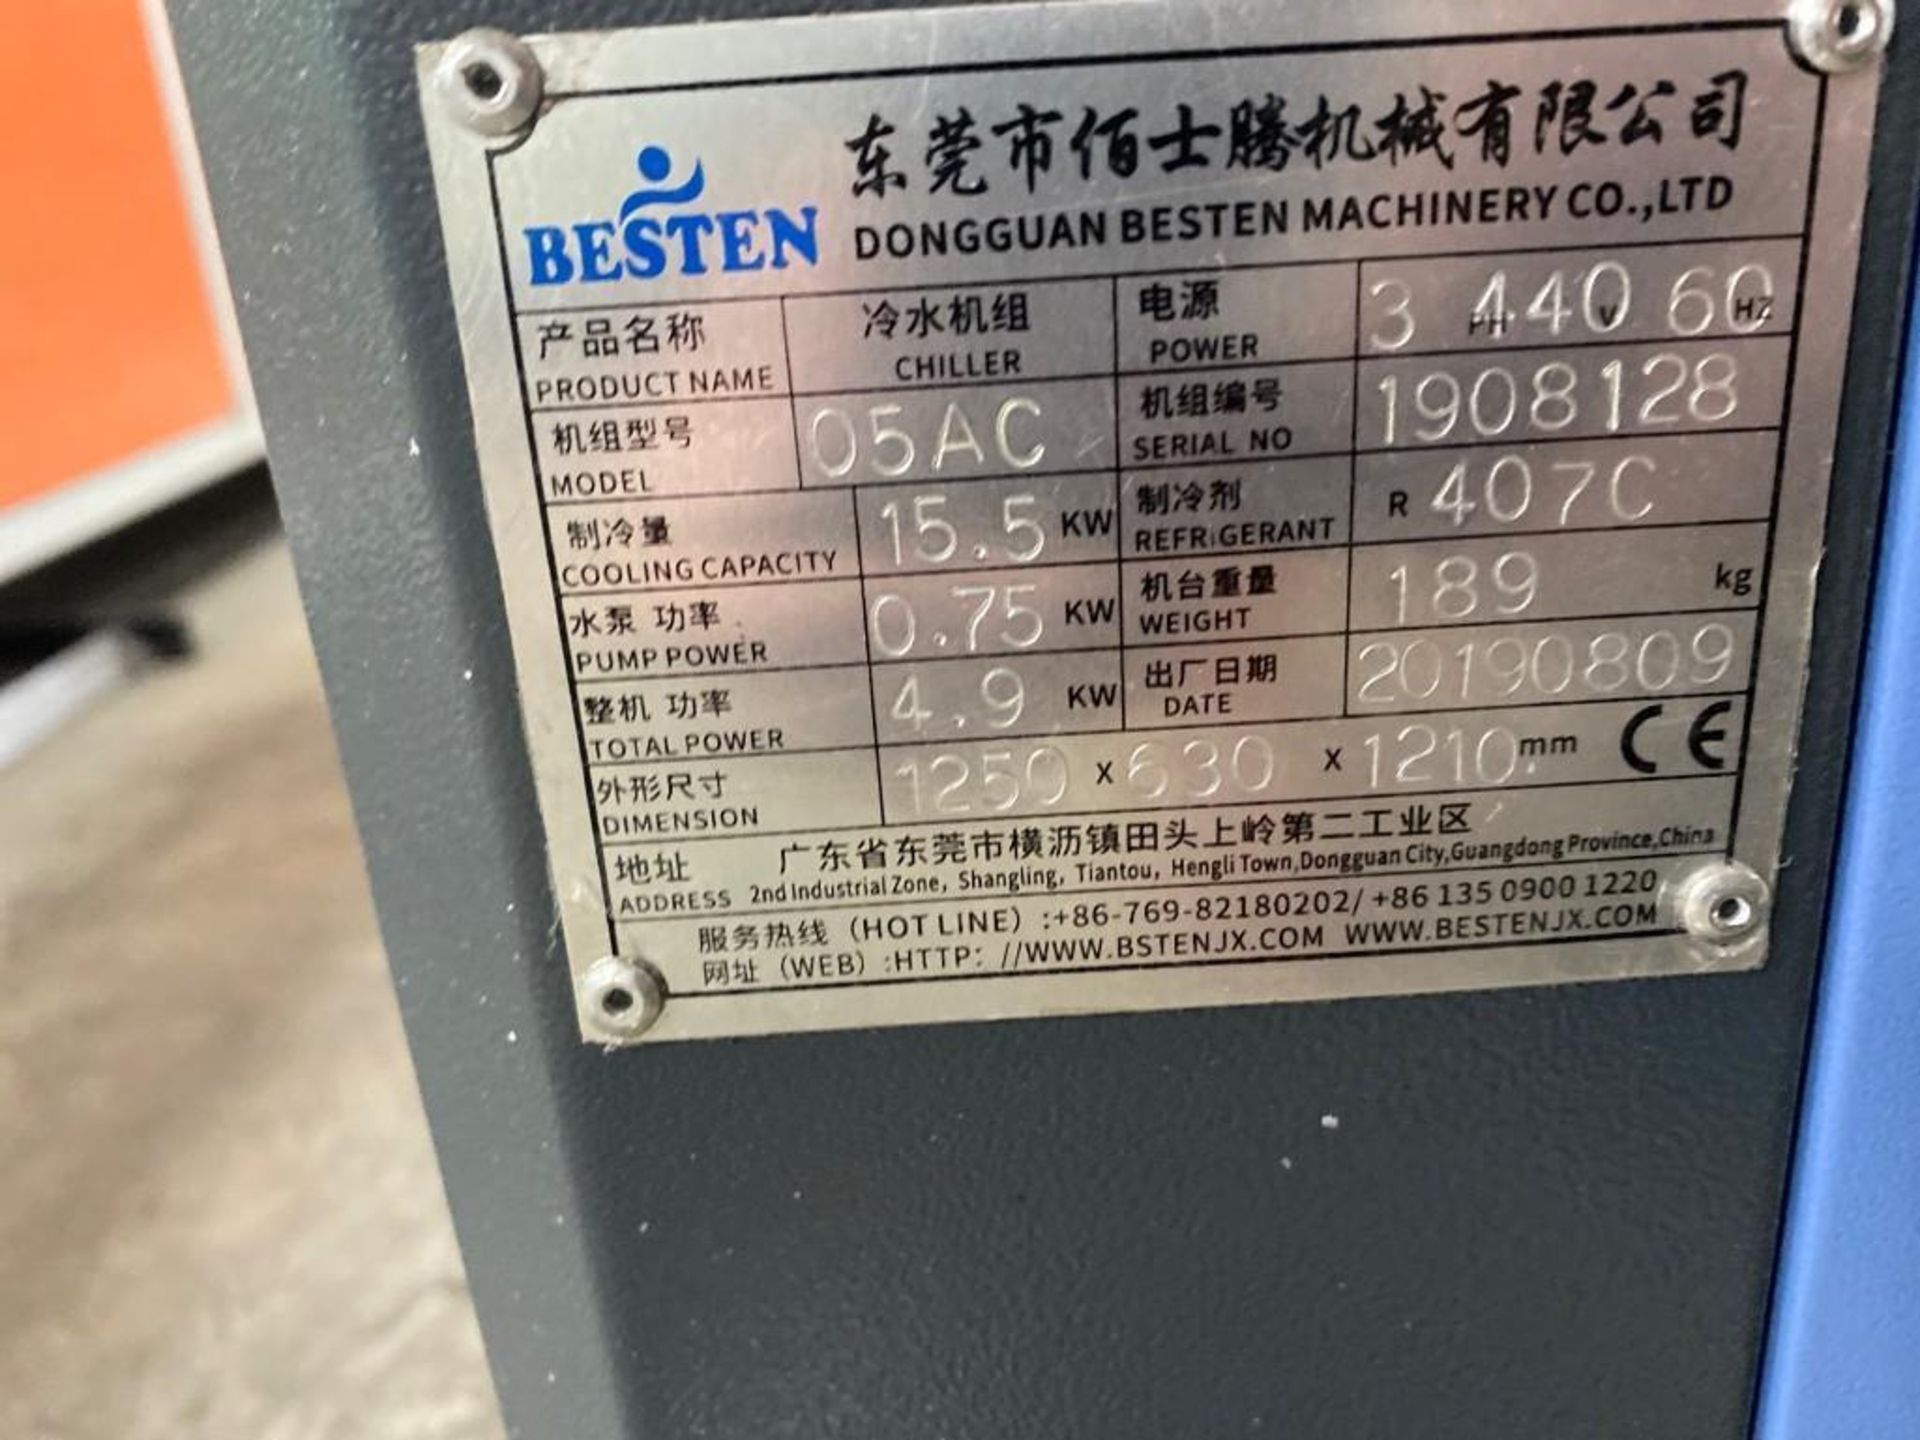 Besten 05AC Air Cooled Chiller, s/n 1908128, New 2019 - Image 3 of 3